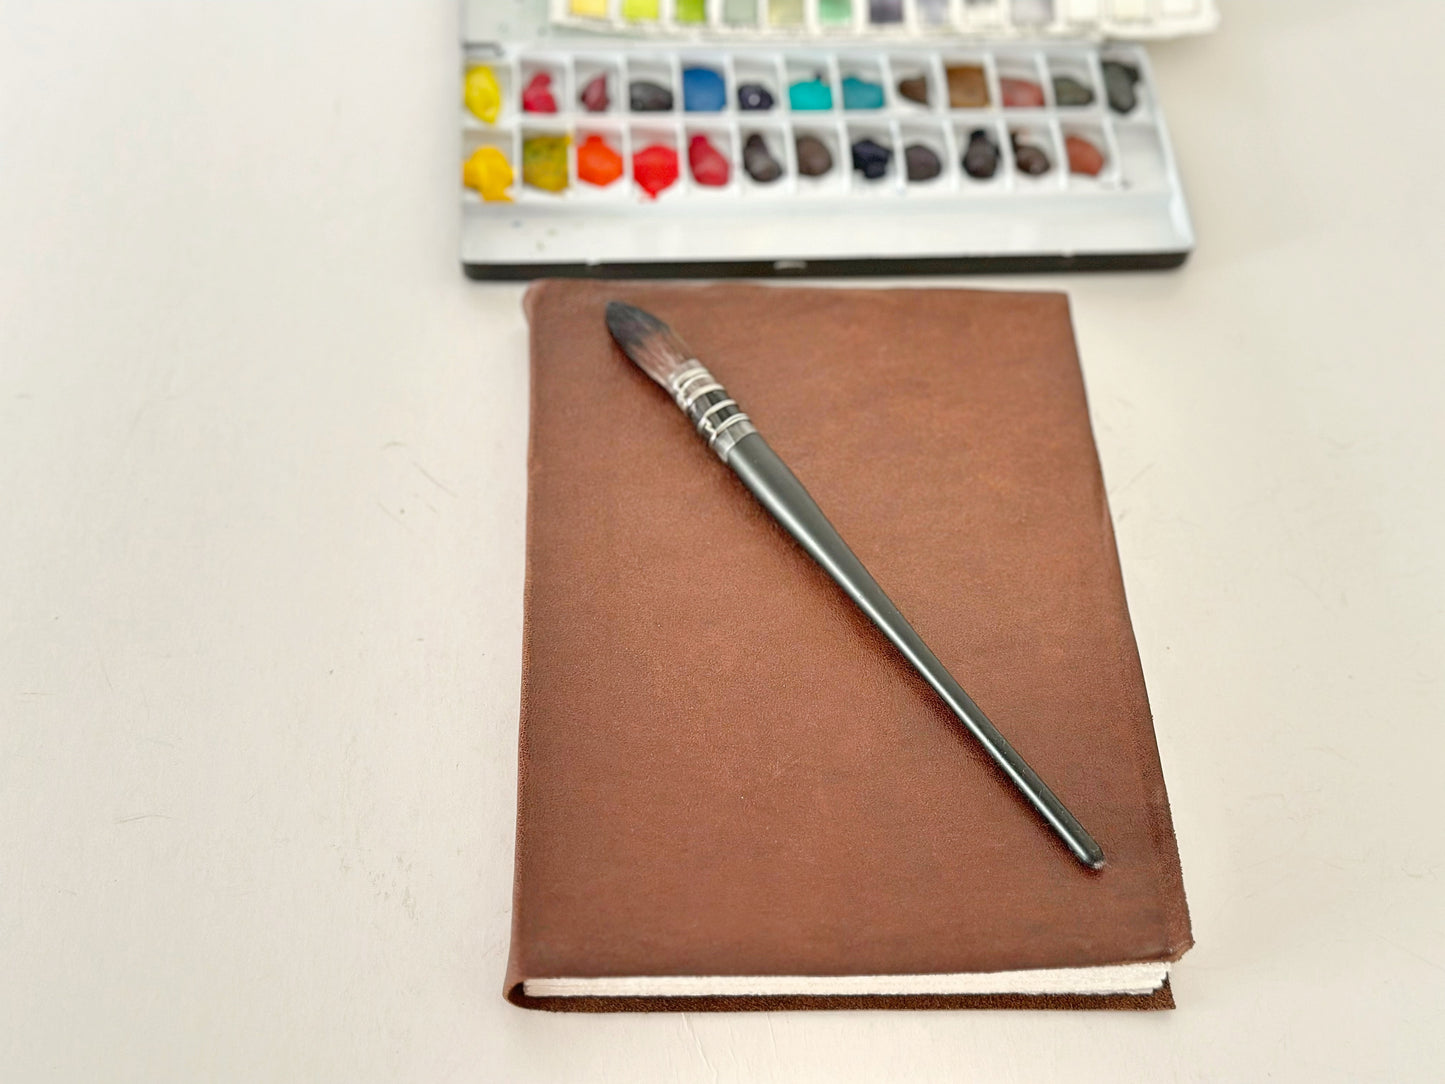 Pocket Cotton Watercolor Sketchbook, Small Travel Field Journal